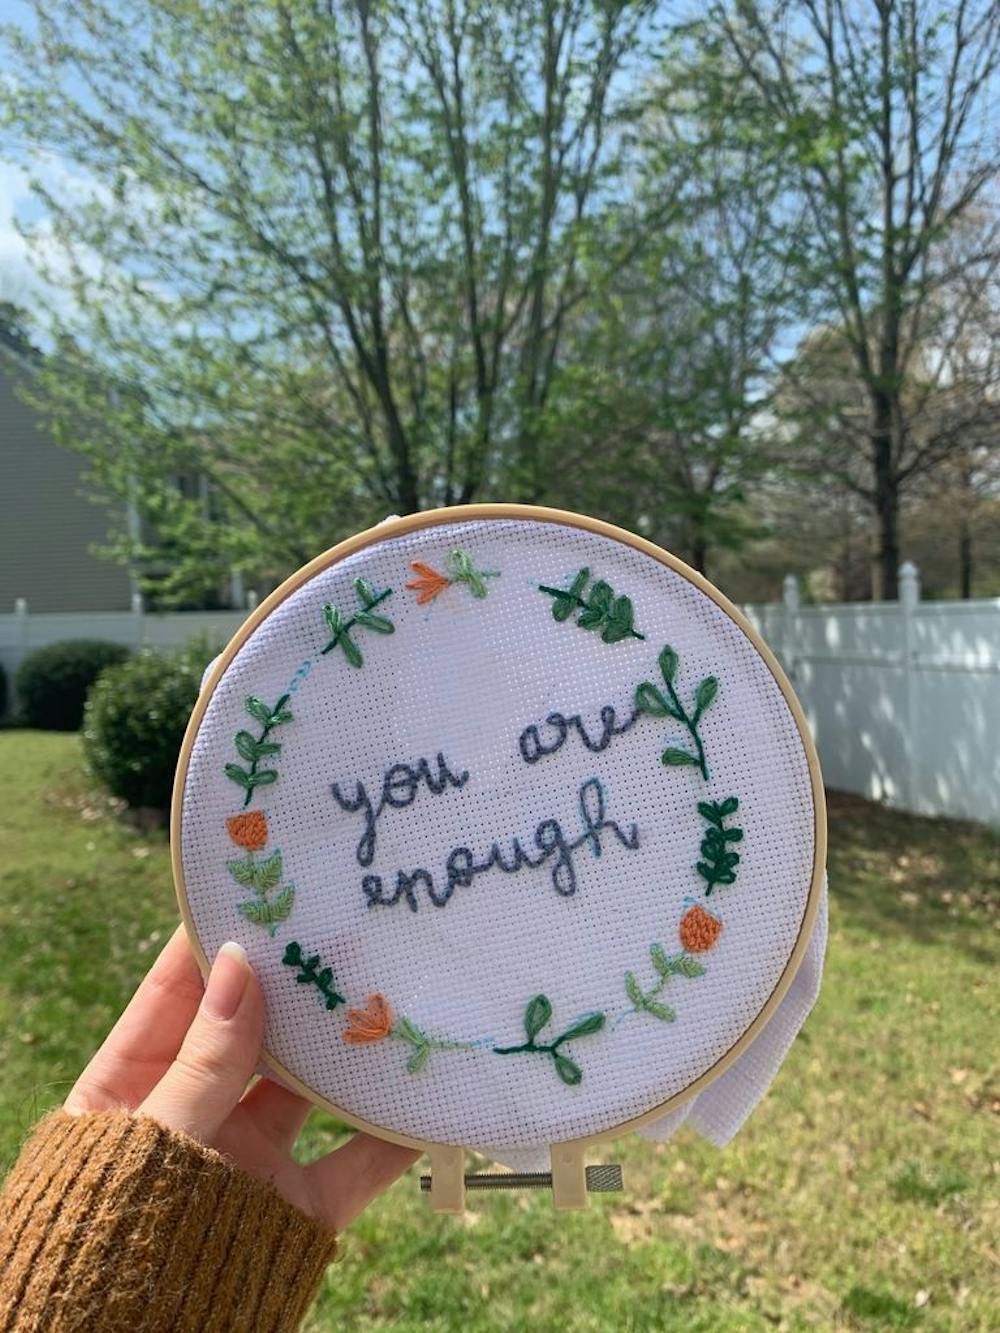 <p>Diana Godoy, a sophomore from Cornelius, N.C., said she now has more time to craft embroidery projects she received in a kit for Christmas during this period of online classes and social distancing. Photo courtesy of Diana Godoy.&nbsp;</p>